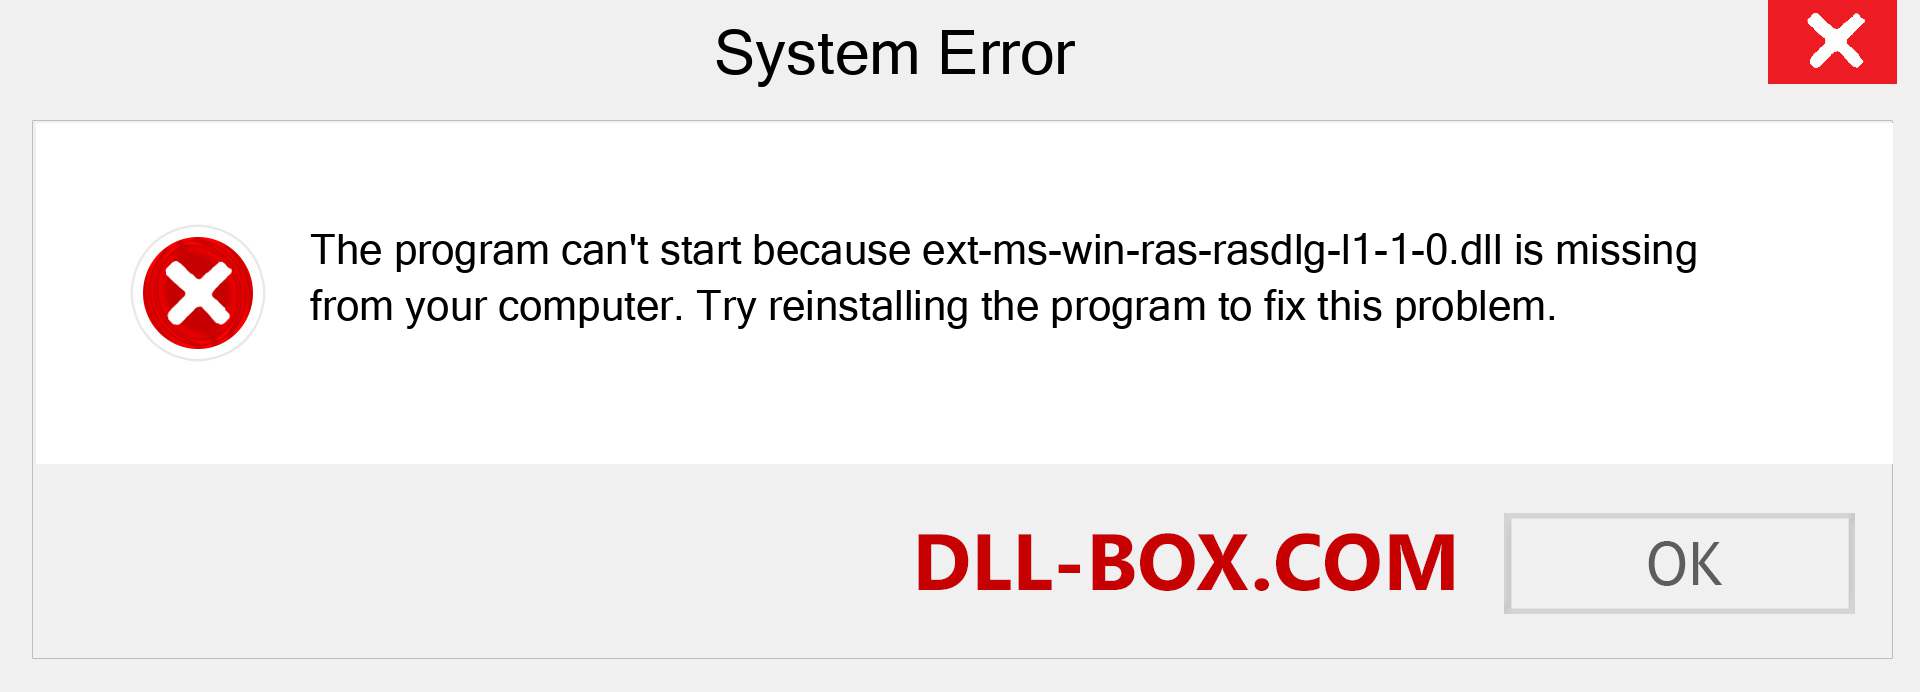  ext-ms-win-ras-rasdlg-l1-1-0.dll file is missing?. Download for Windows 7, 8, 10 - Fix  ext-ms-win-ras-rasdlg-l1-1-0 dll Missing Error on Windows, photos, images